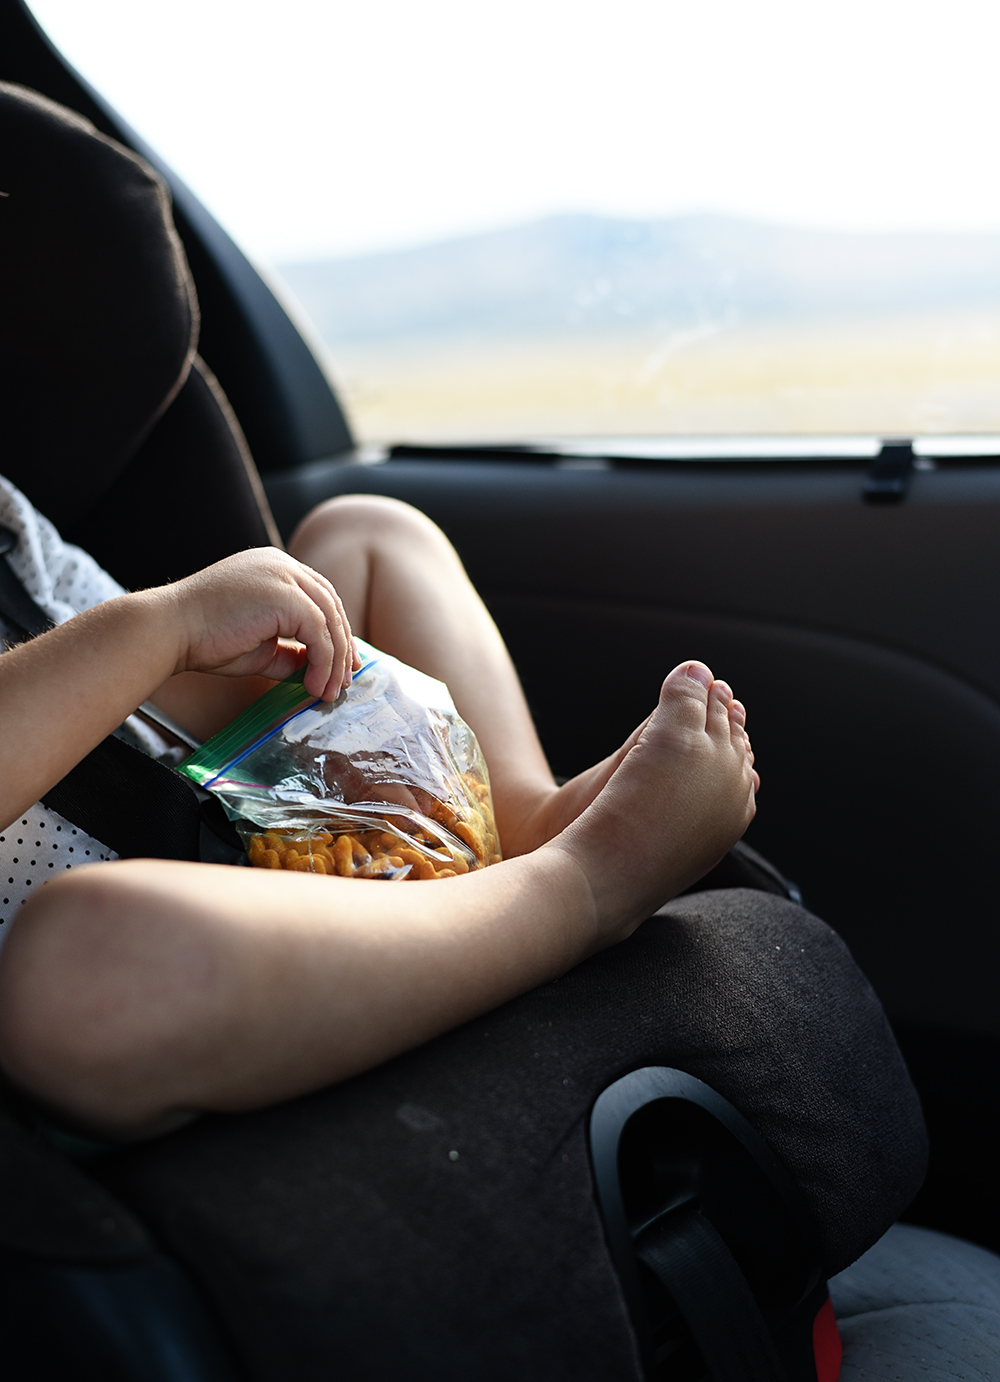 Don't forget the snacks on a screen-free road trip with kids